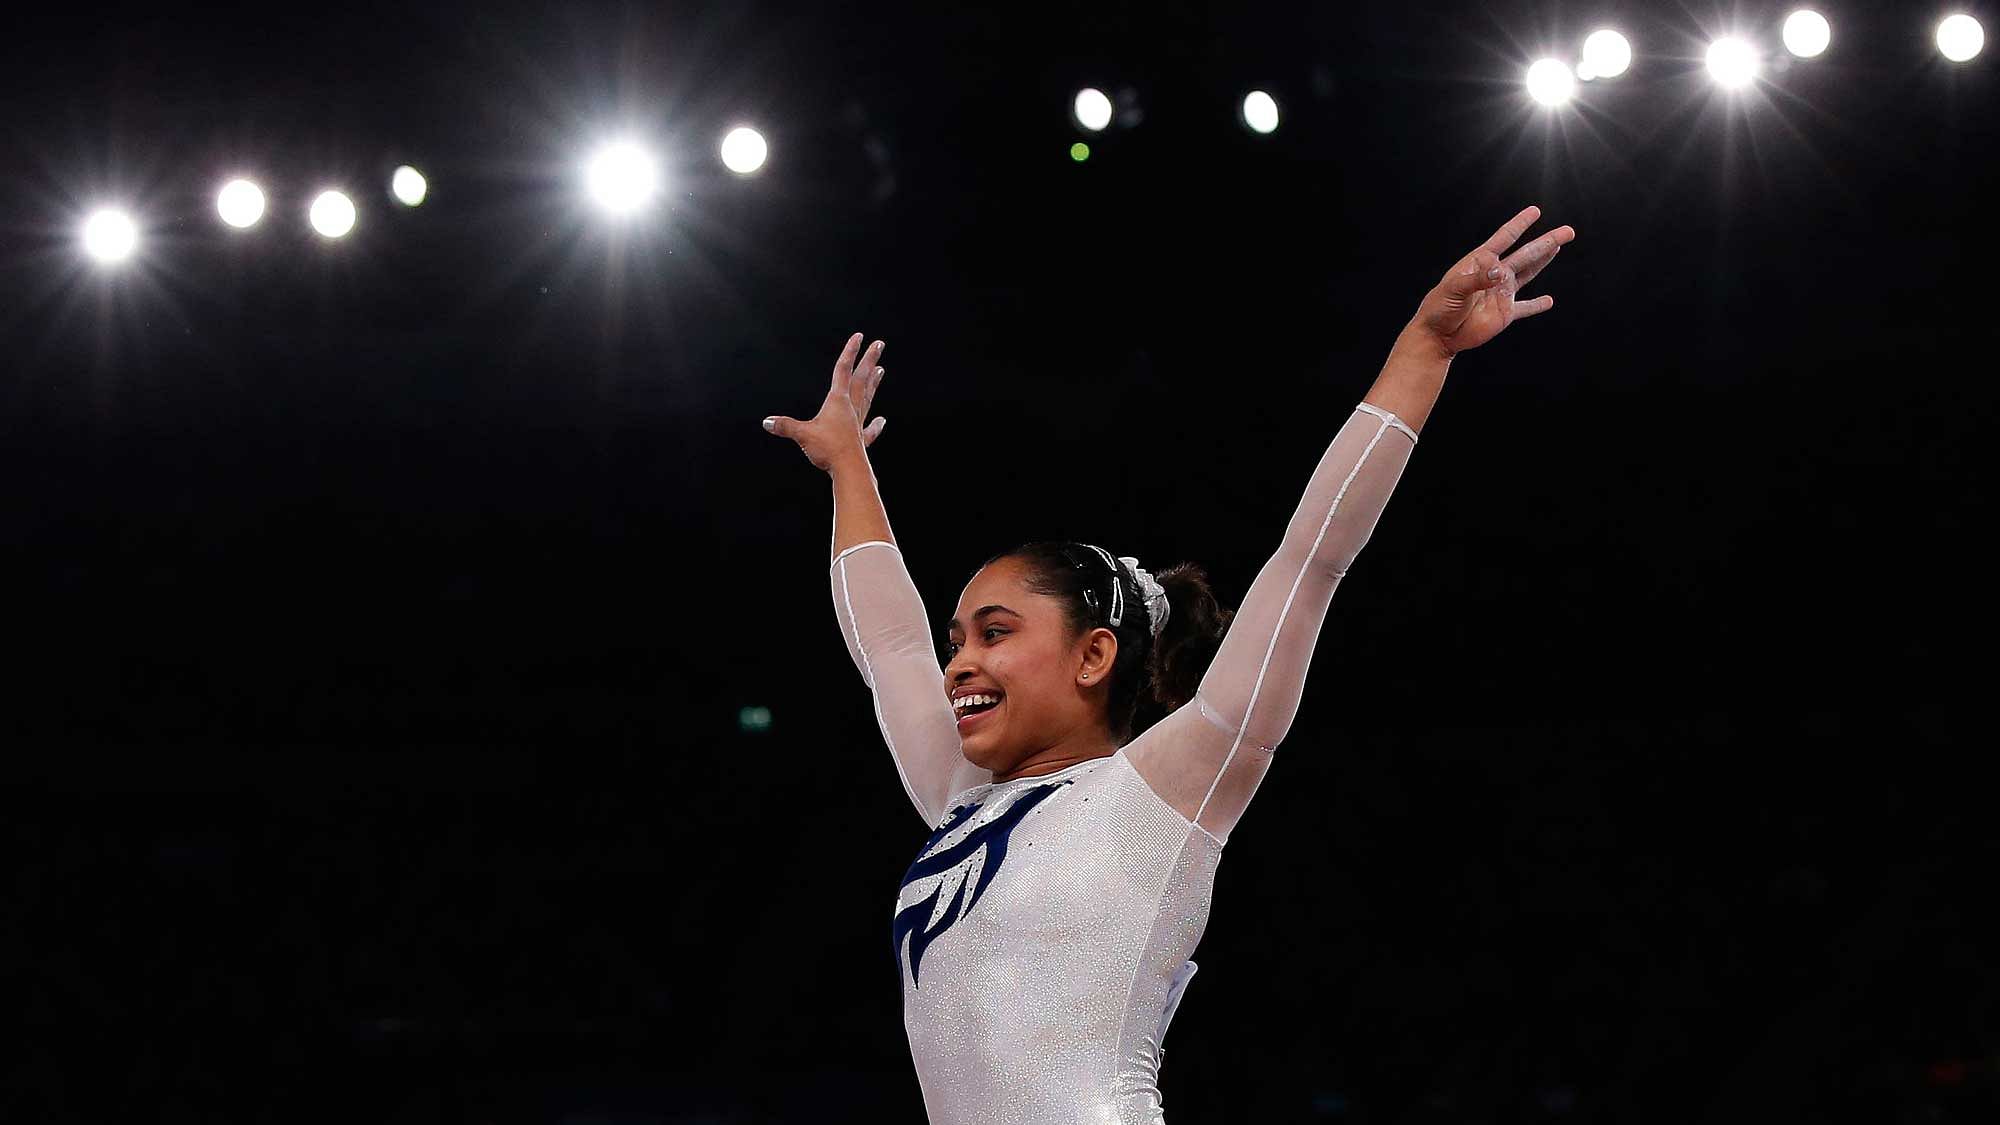 Dipa Karmakar reacts after a successful vault during the women’s gymnastics vault apparatus final at the 2014 Commonwealth Games in Glasgow .